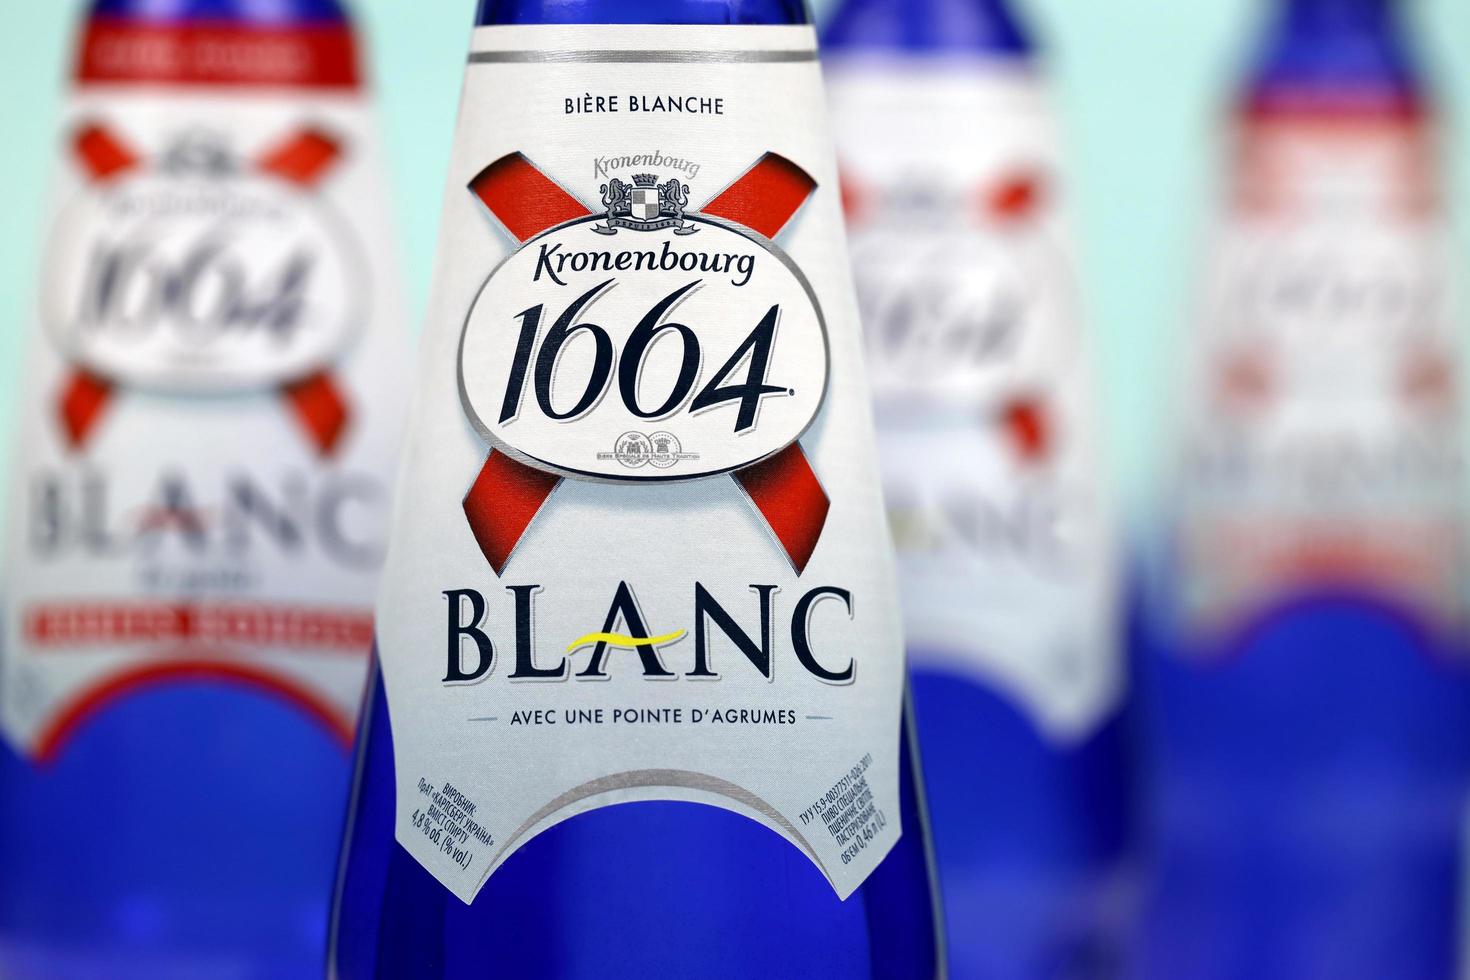 KHARKOV, UKRAINE - DECEMBER 8, 2020 Blanc logo on beer bottles on white table. 1664 Blanc is the wheat beer from French brewery Kronenbourg exported worldwide photo